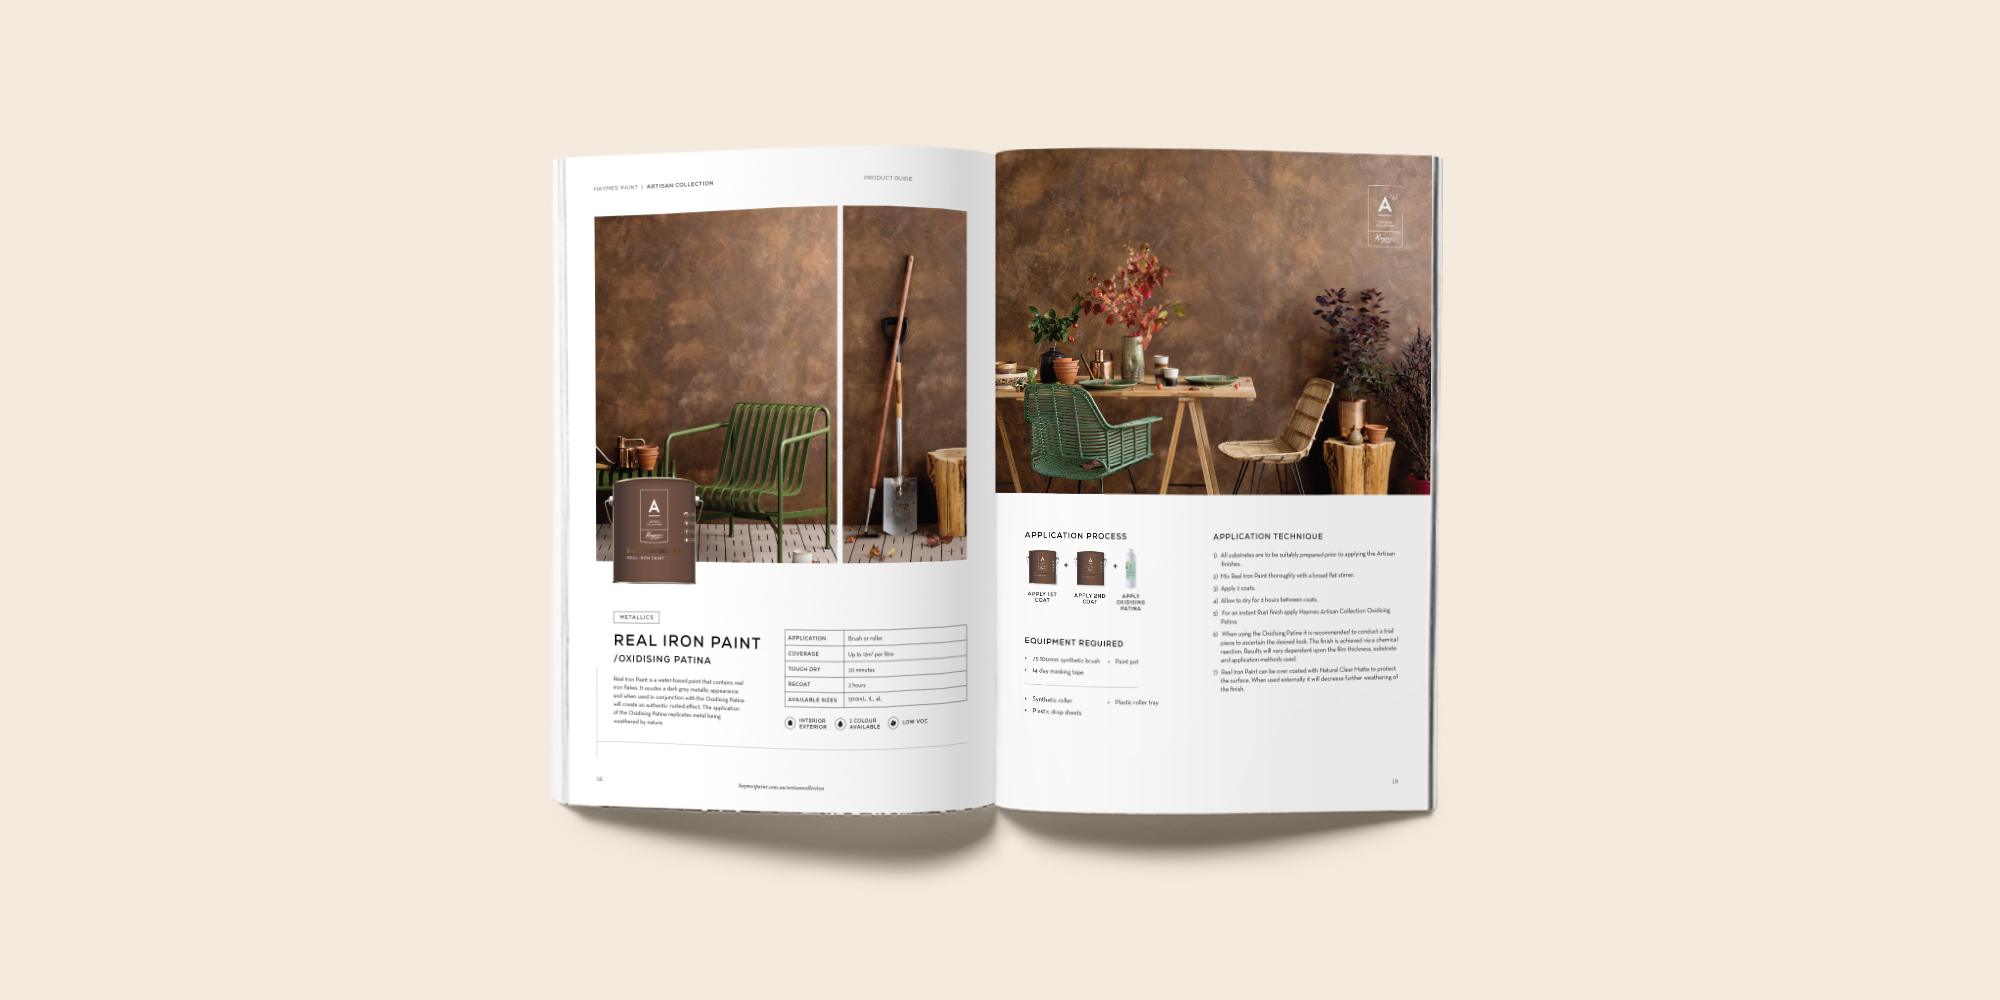 Haymes Artisan Collection Product Manual